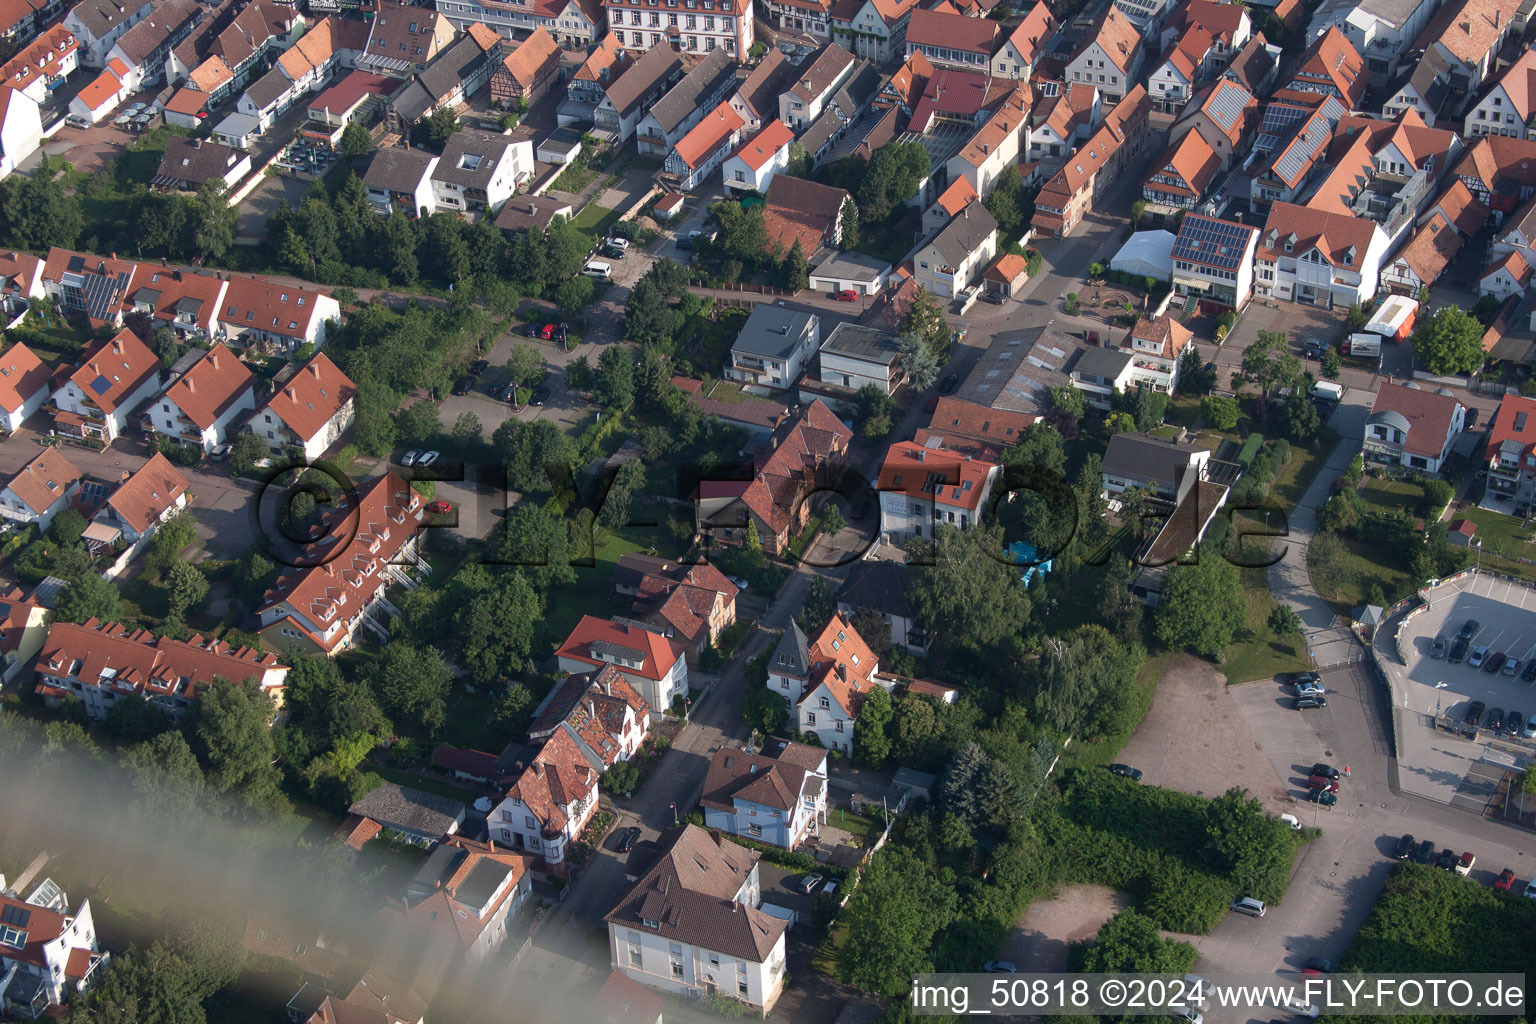 Aerial photograpy of Bismarckstr in Kandel in the state Rhineland-Palatinate, Germany